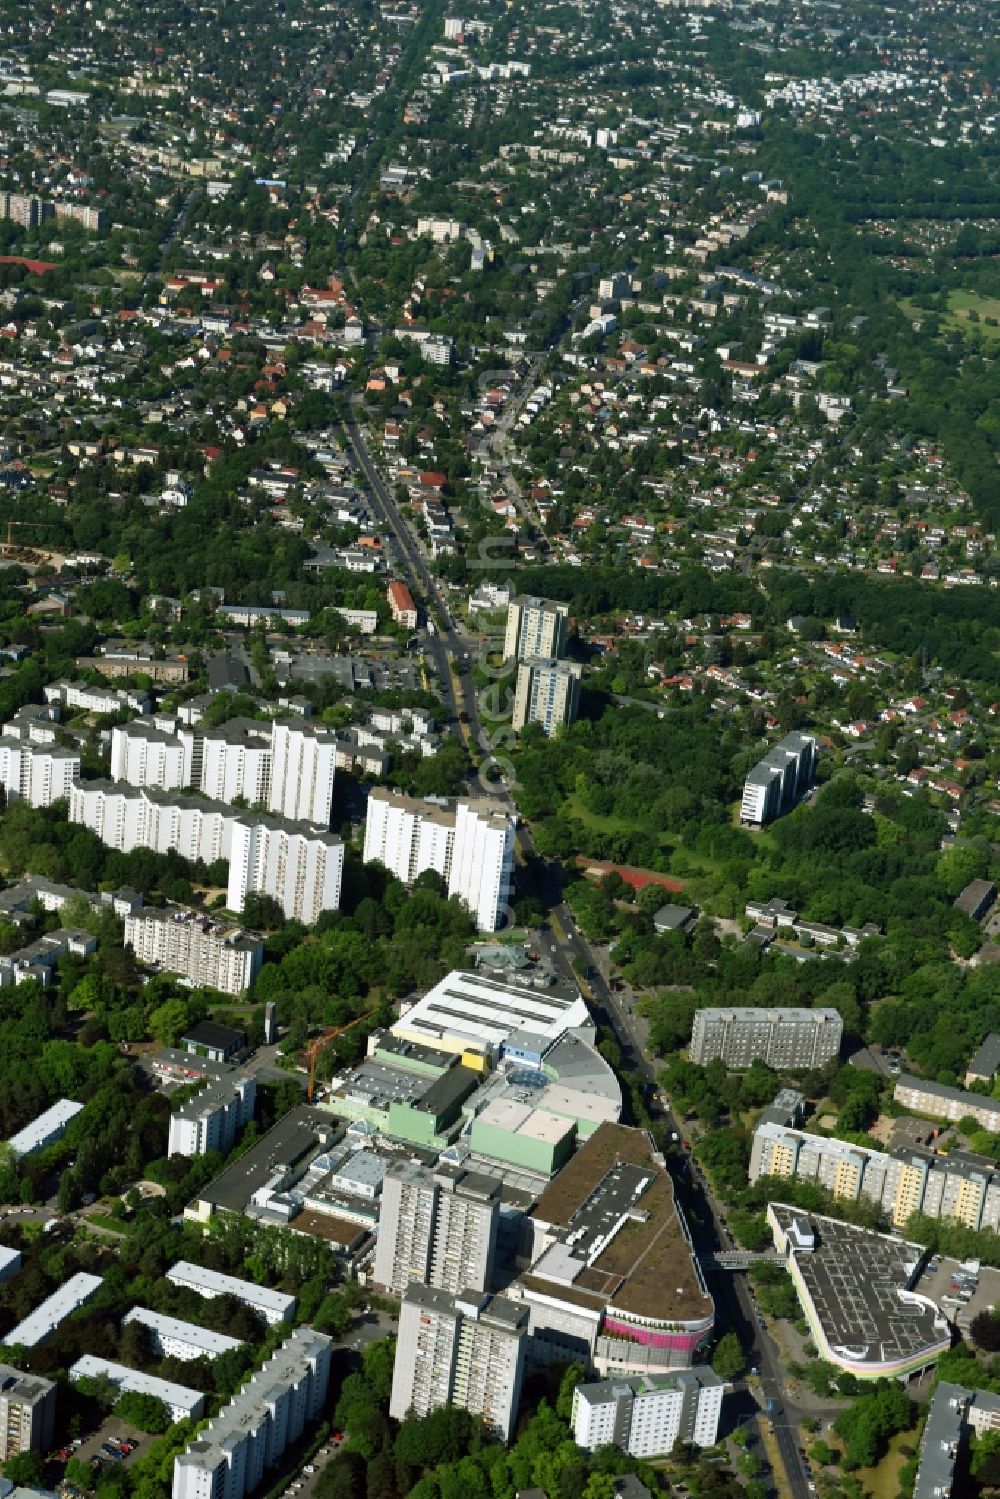 Aerial image Berlin - Building complex of the shopping mall Gropius Passagen in the Gropiusstadt part of the district of Neukoelln in Berlin in Germany. The mall is located on Johannisthaler Chaussee amidst residential areas